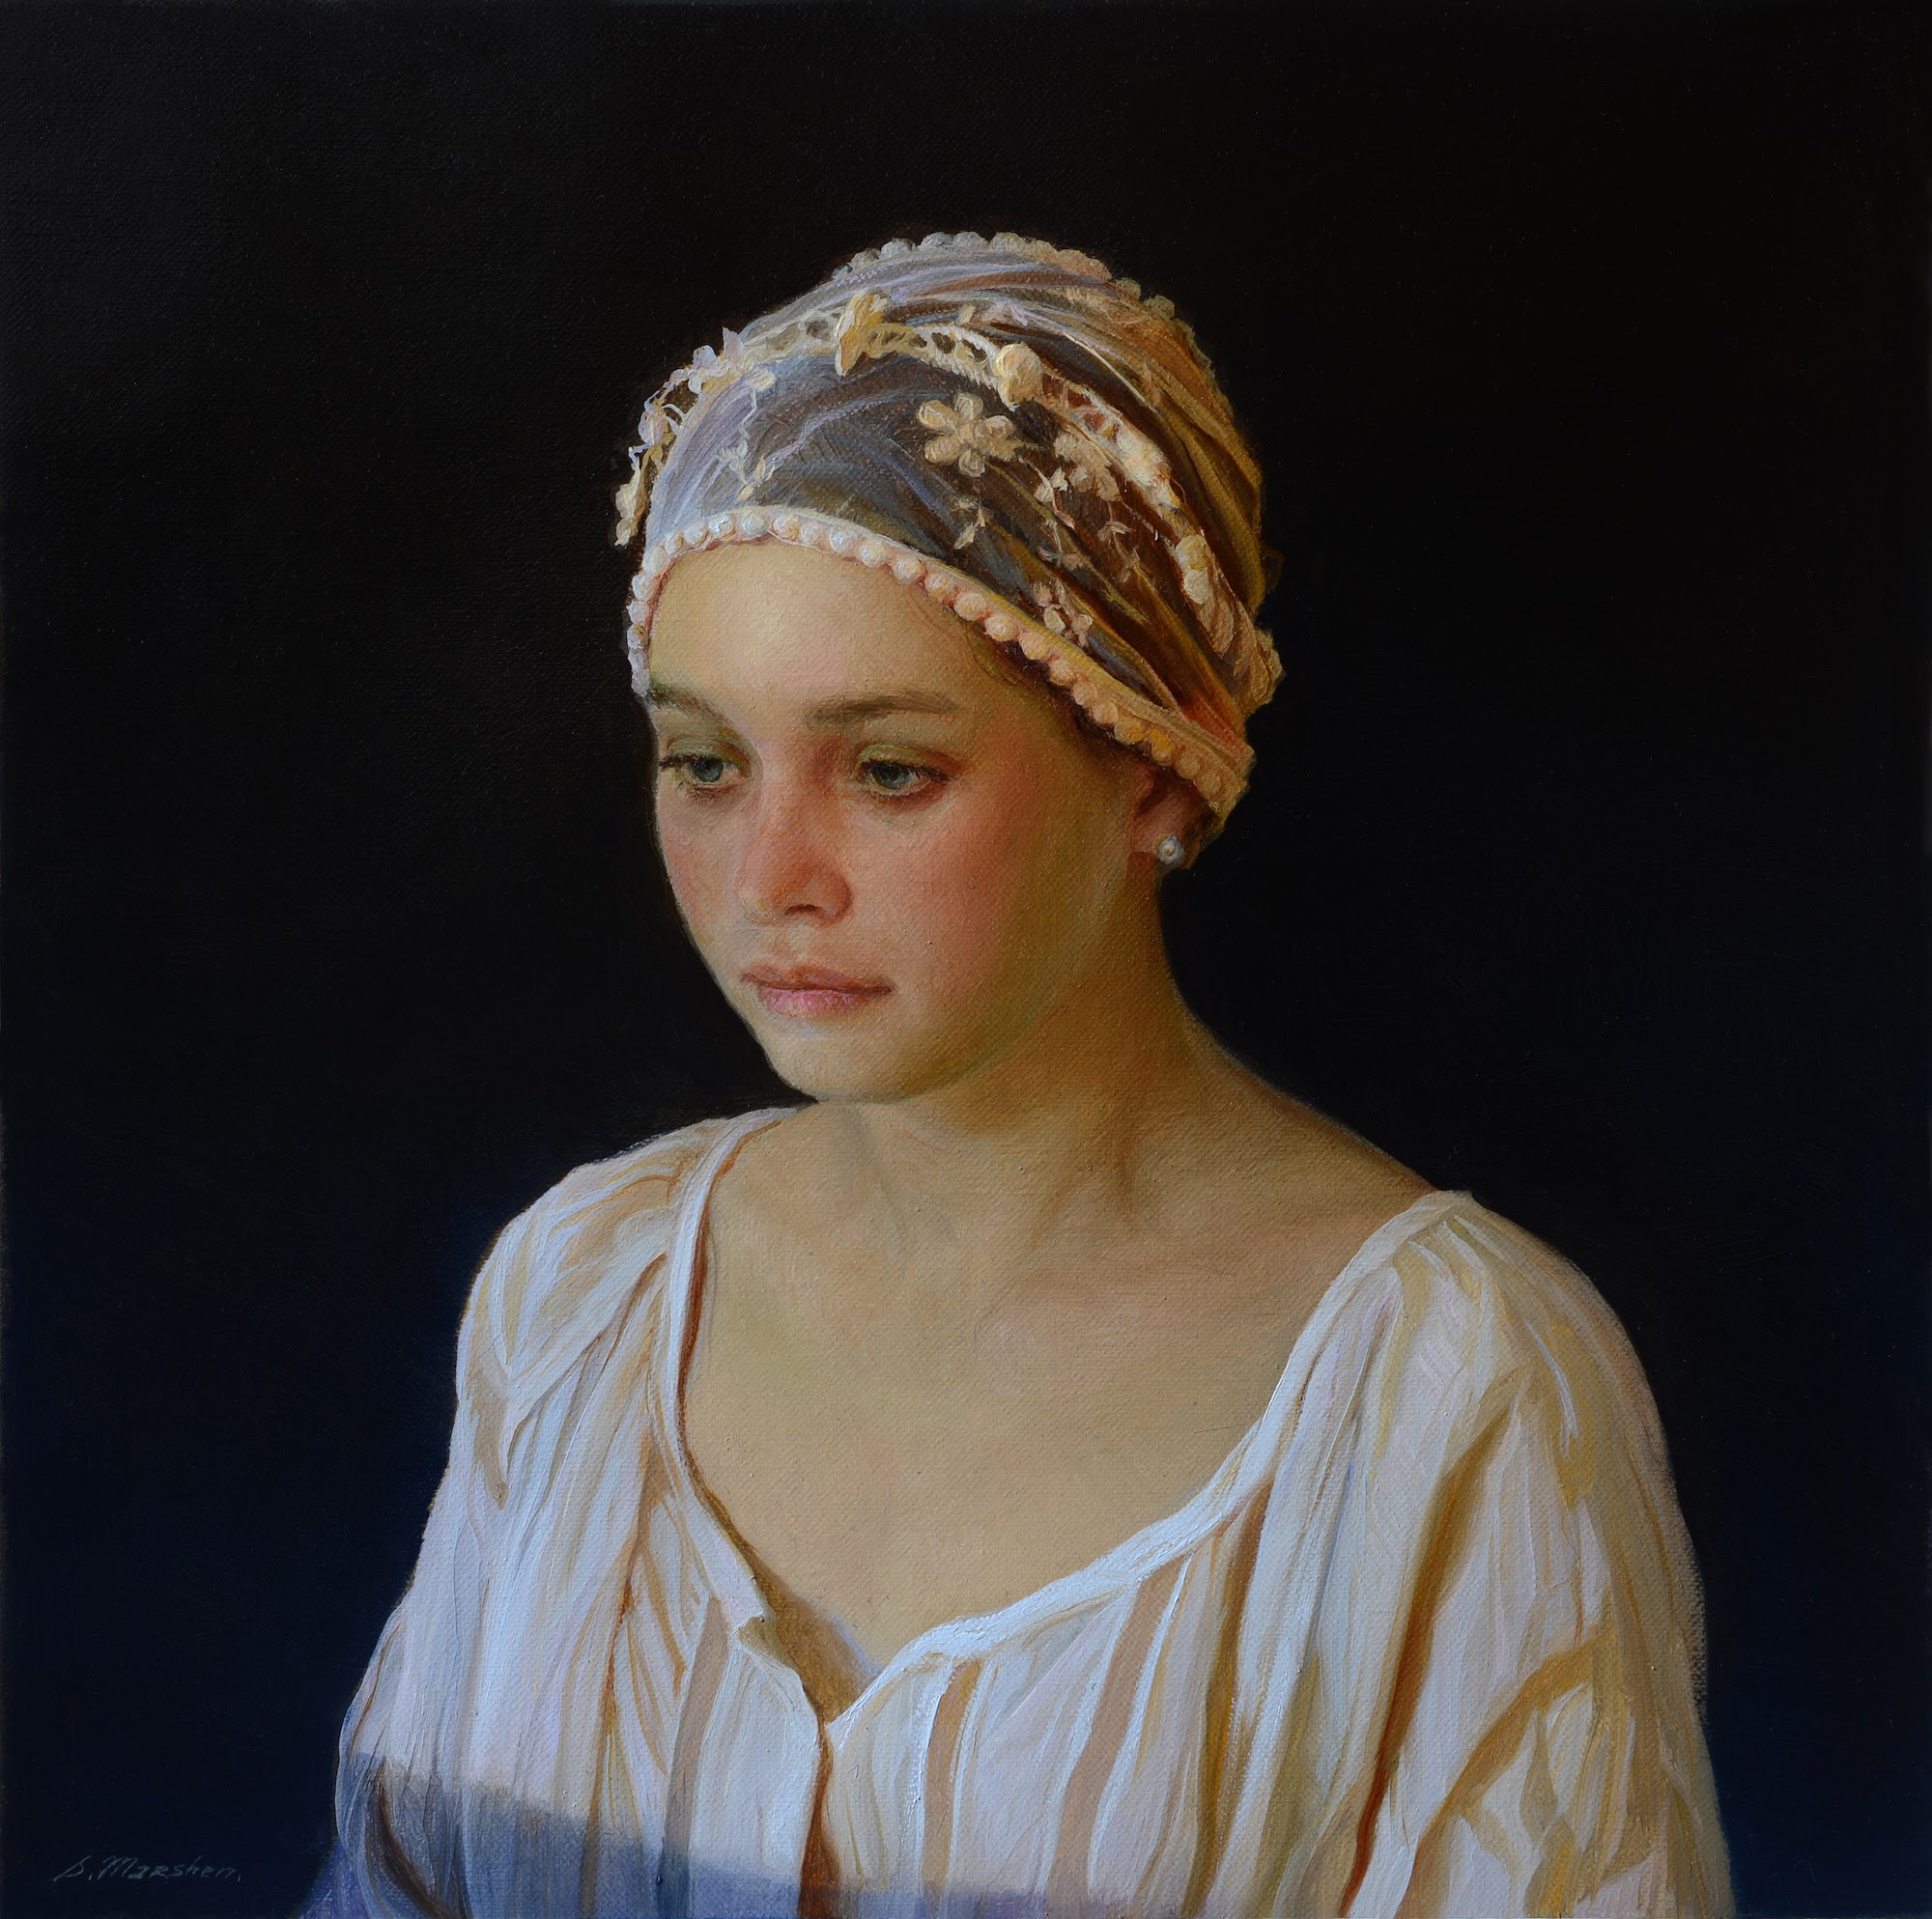 Contemporary realism portrait painting - "Small Shadow" by Serge Marshennikov